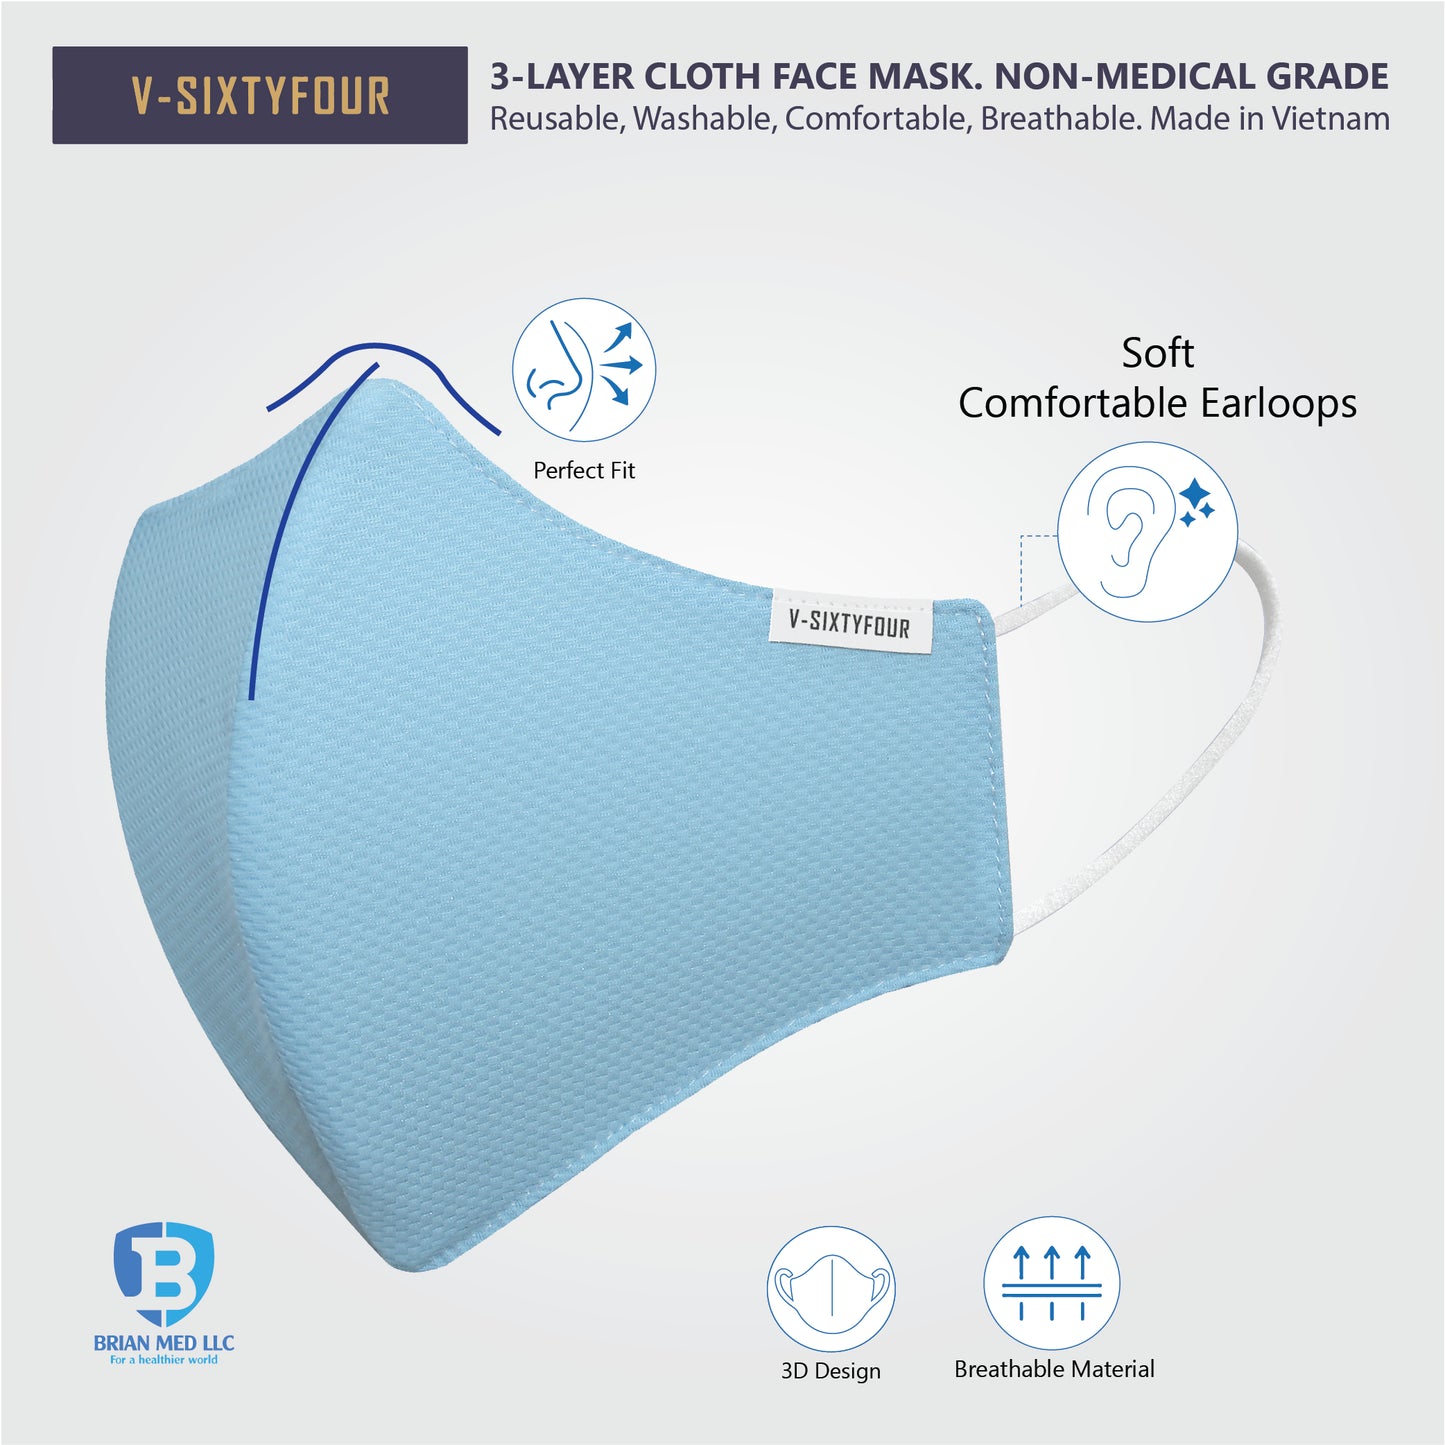 [Pack of 5] 3-Layer cloth face mask. Non-medical grade. Comfort, breathable. Made in Vietnam. PIN